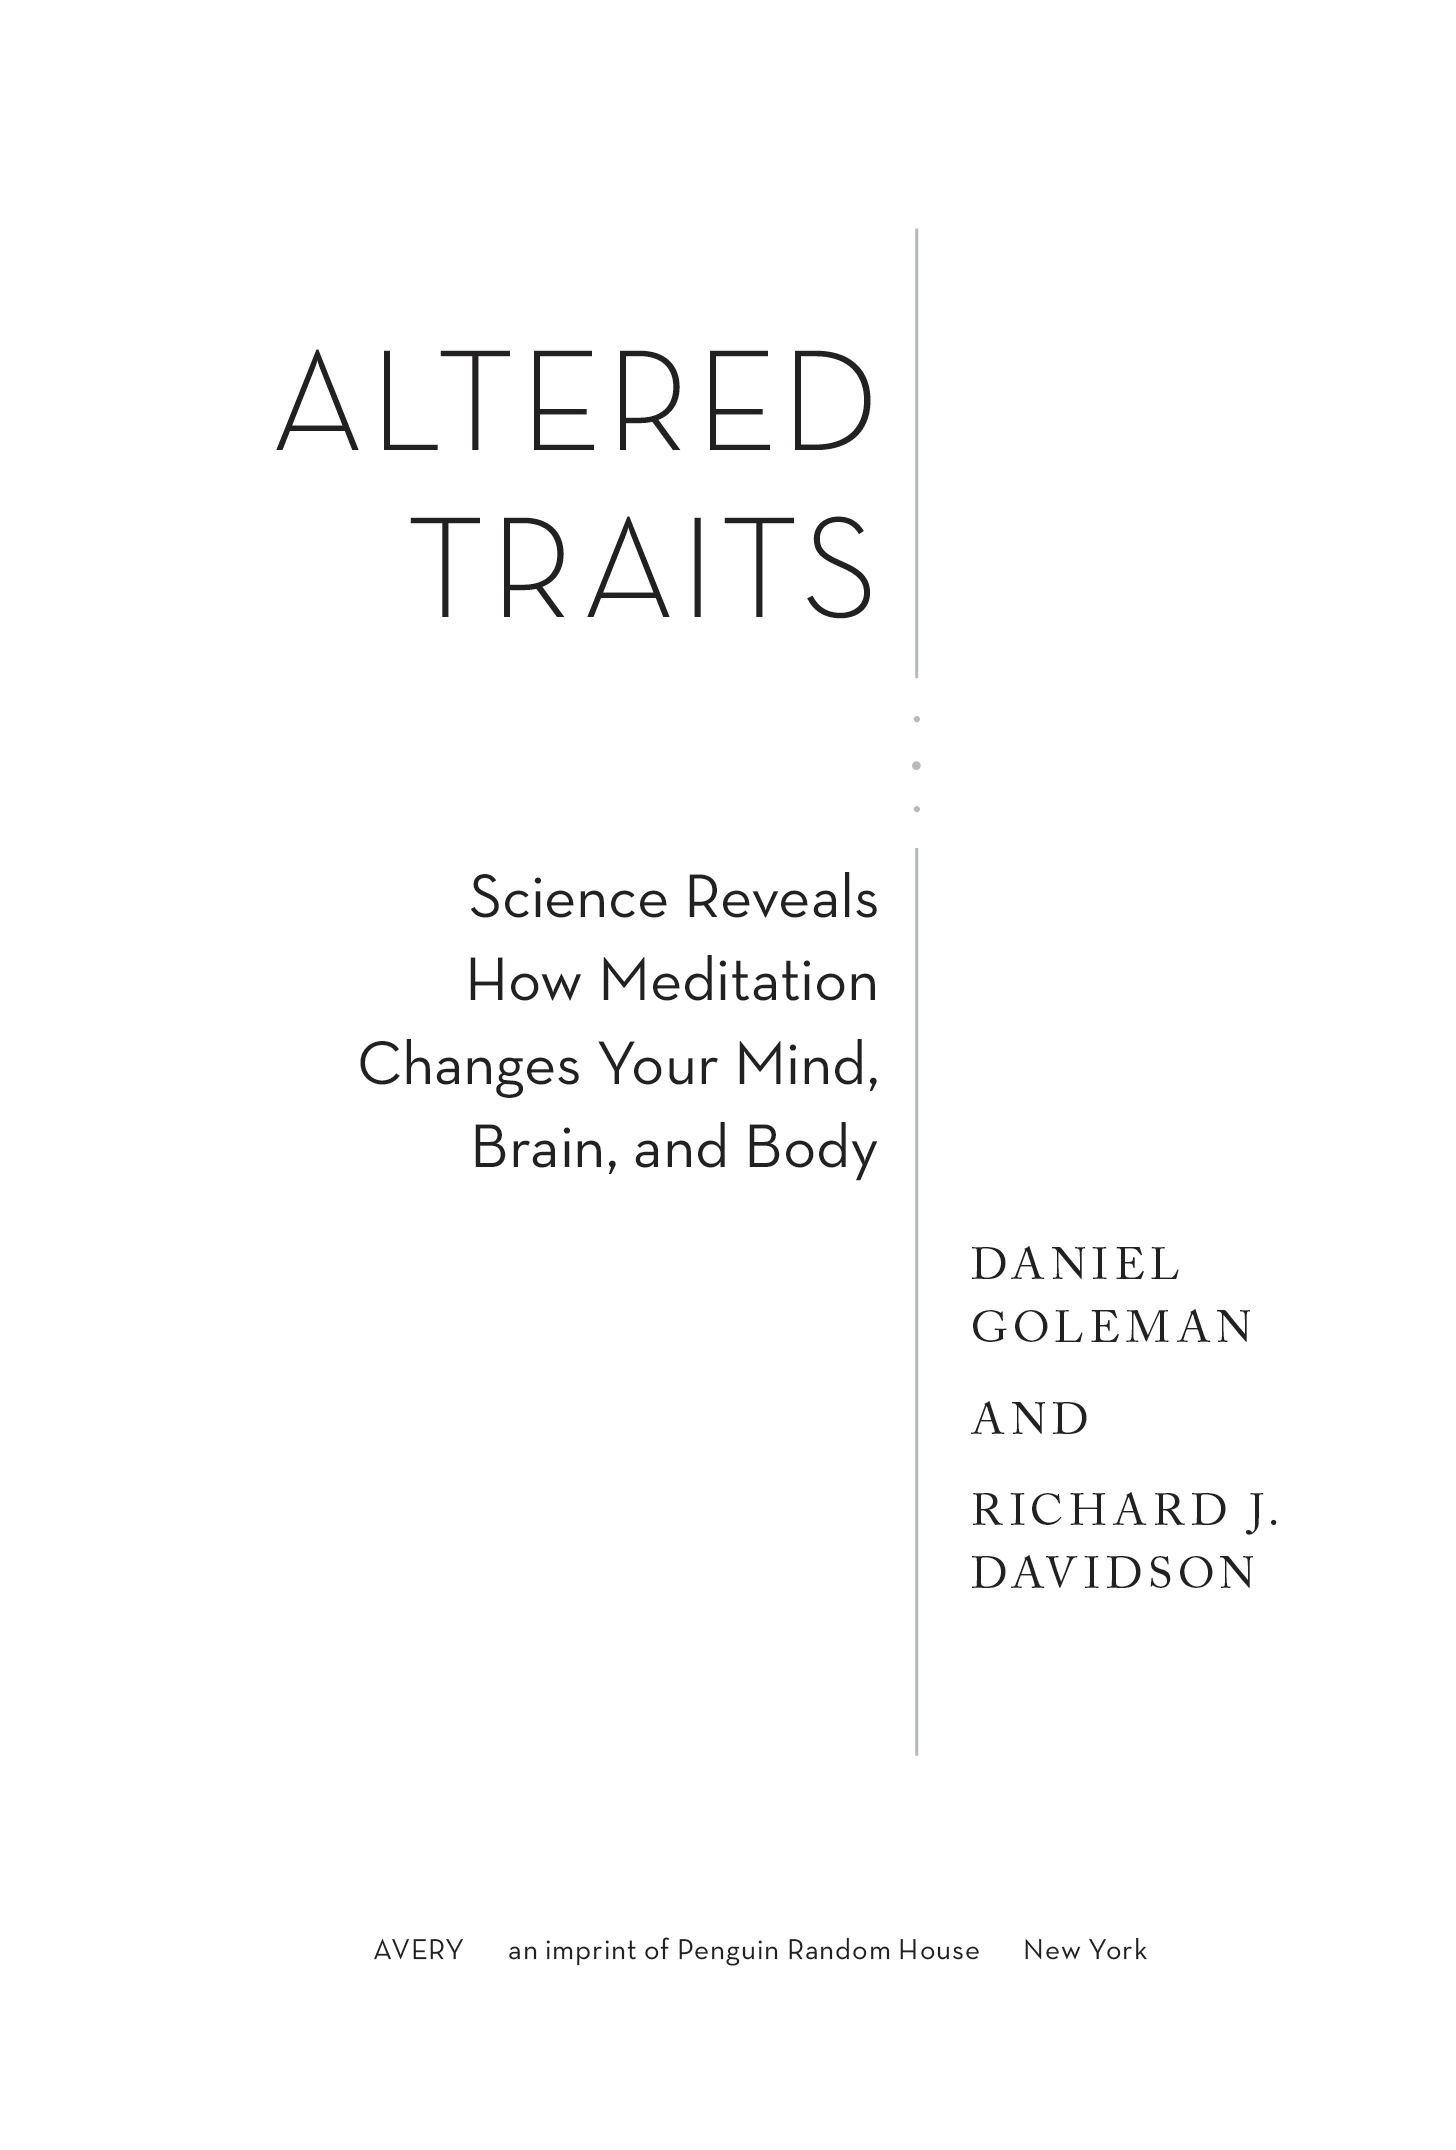 Altered traits science reveals how meditation changes your mind brain and body - image 2